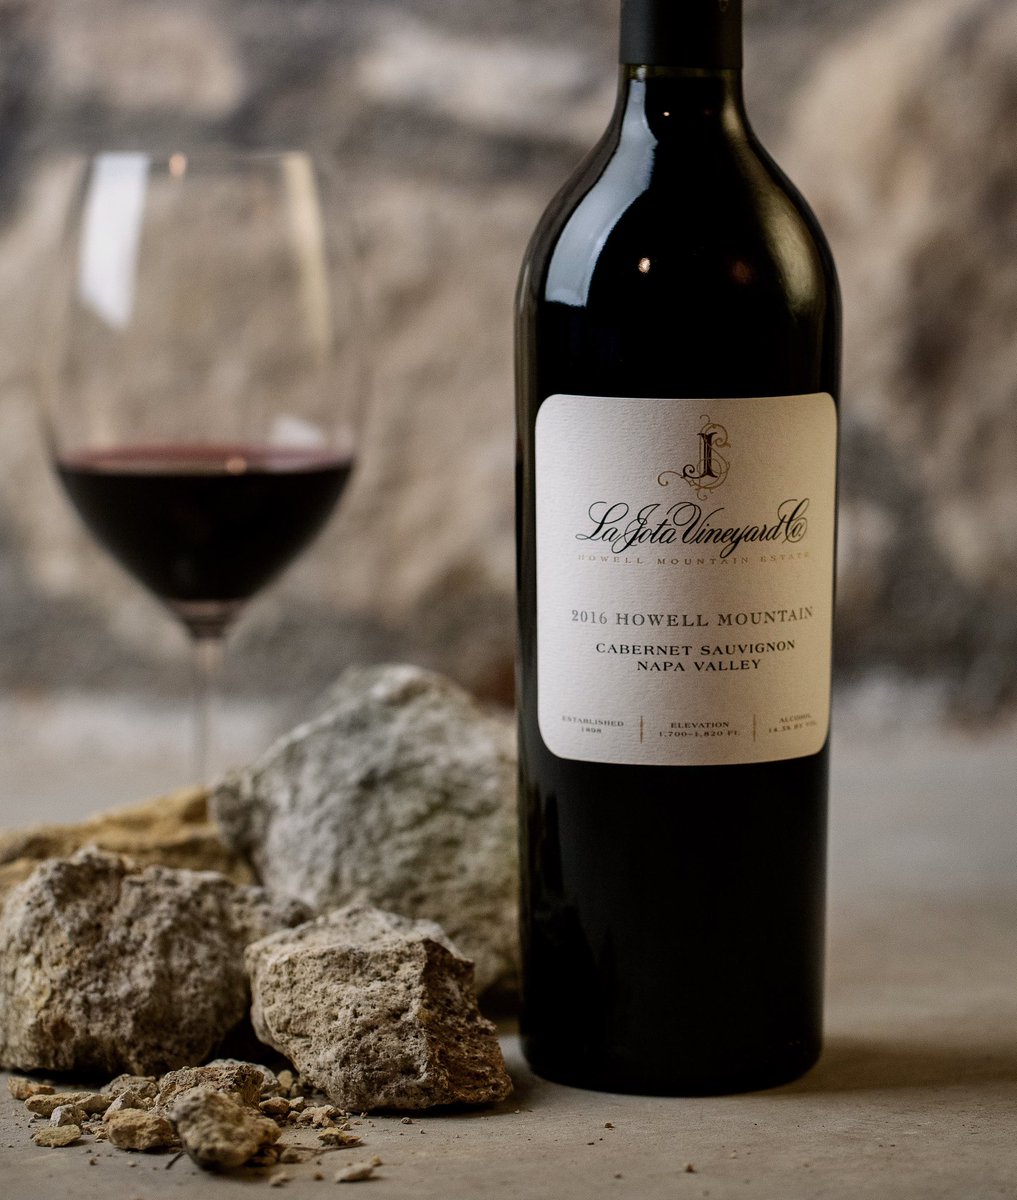 Full, firm and decadently fruited— our 2016 Cabernet Sauvignon is one of the purest expressions of Howell Mountain in recent vintages. Built to age for upwards of 20 years, but irresistible on a day like #CabernetDay. 🍷: lajotavineyardco.com/cabernet-sauvi…